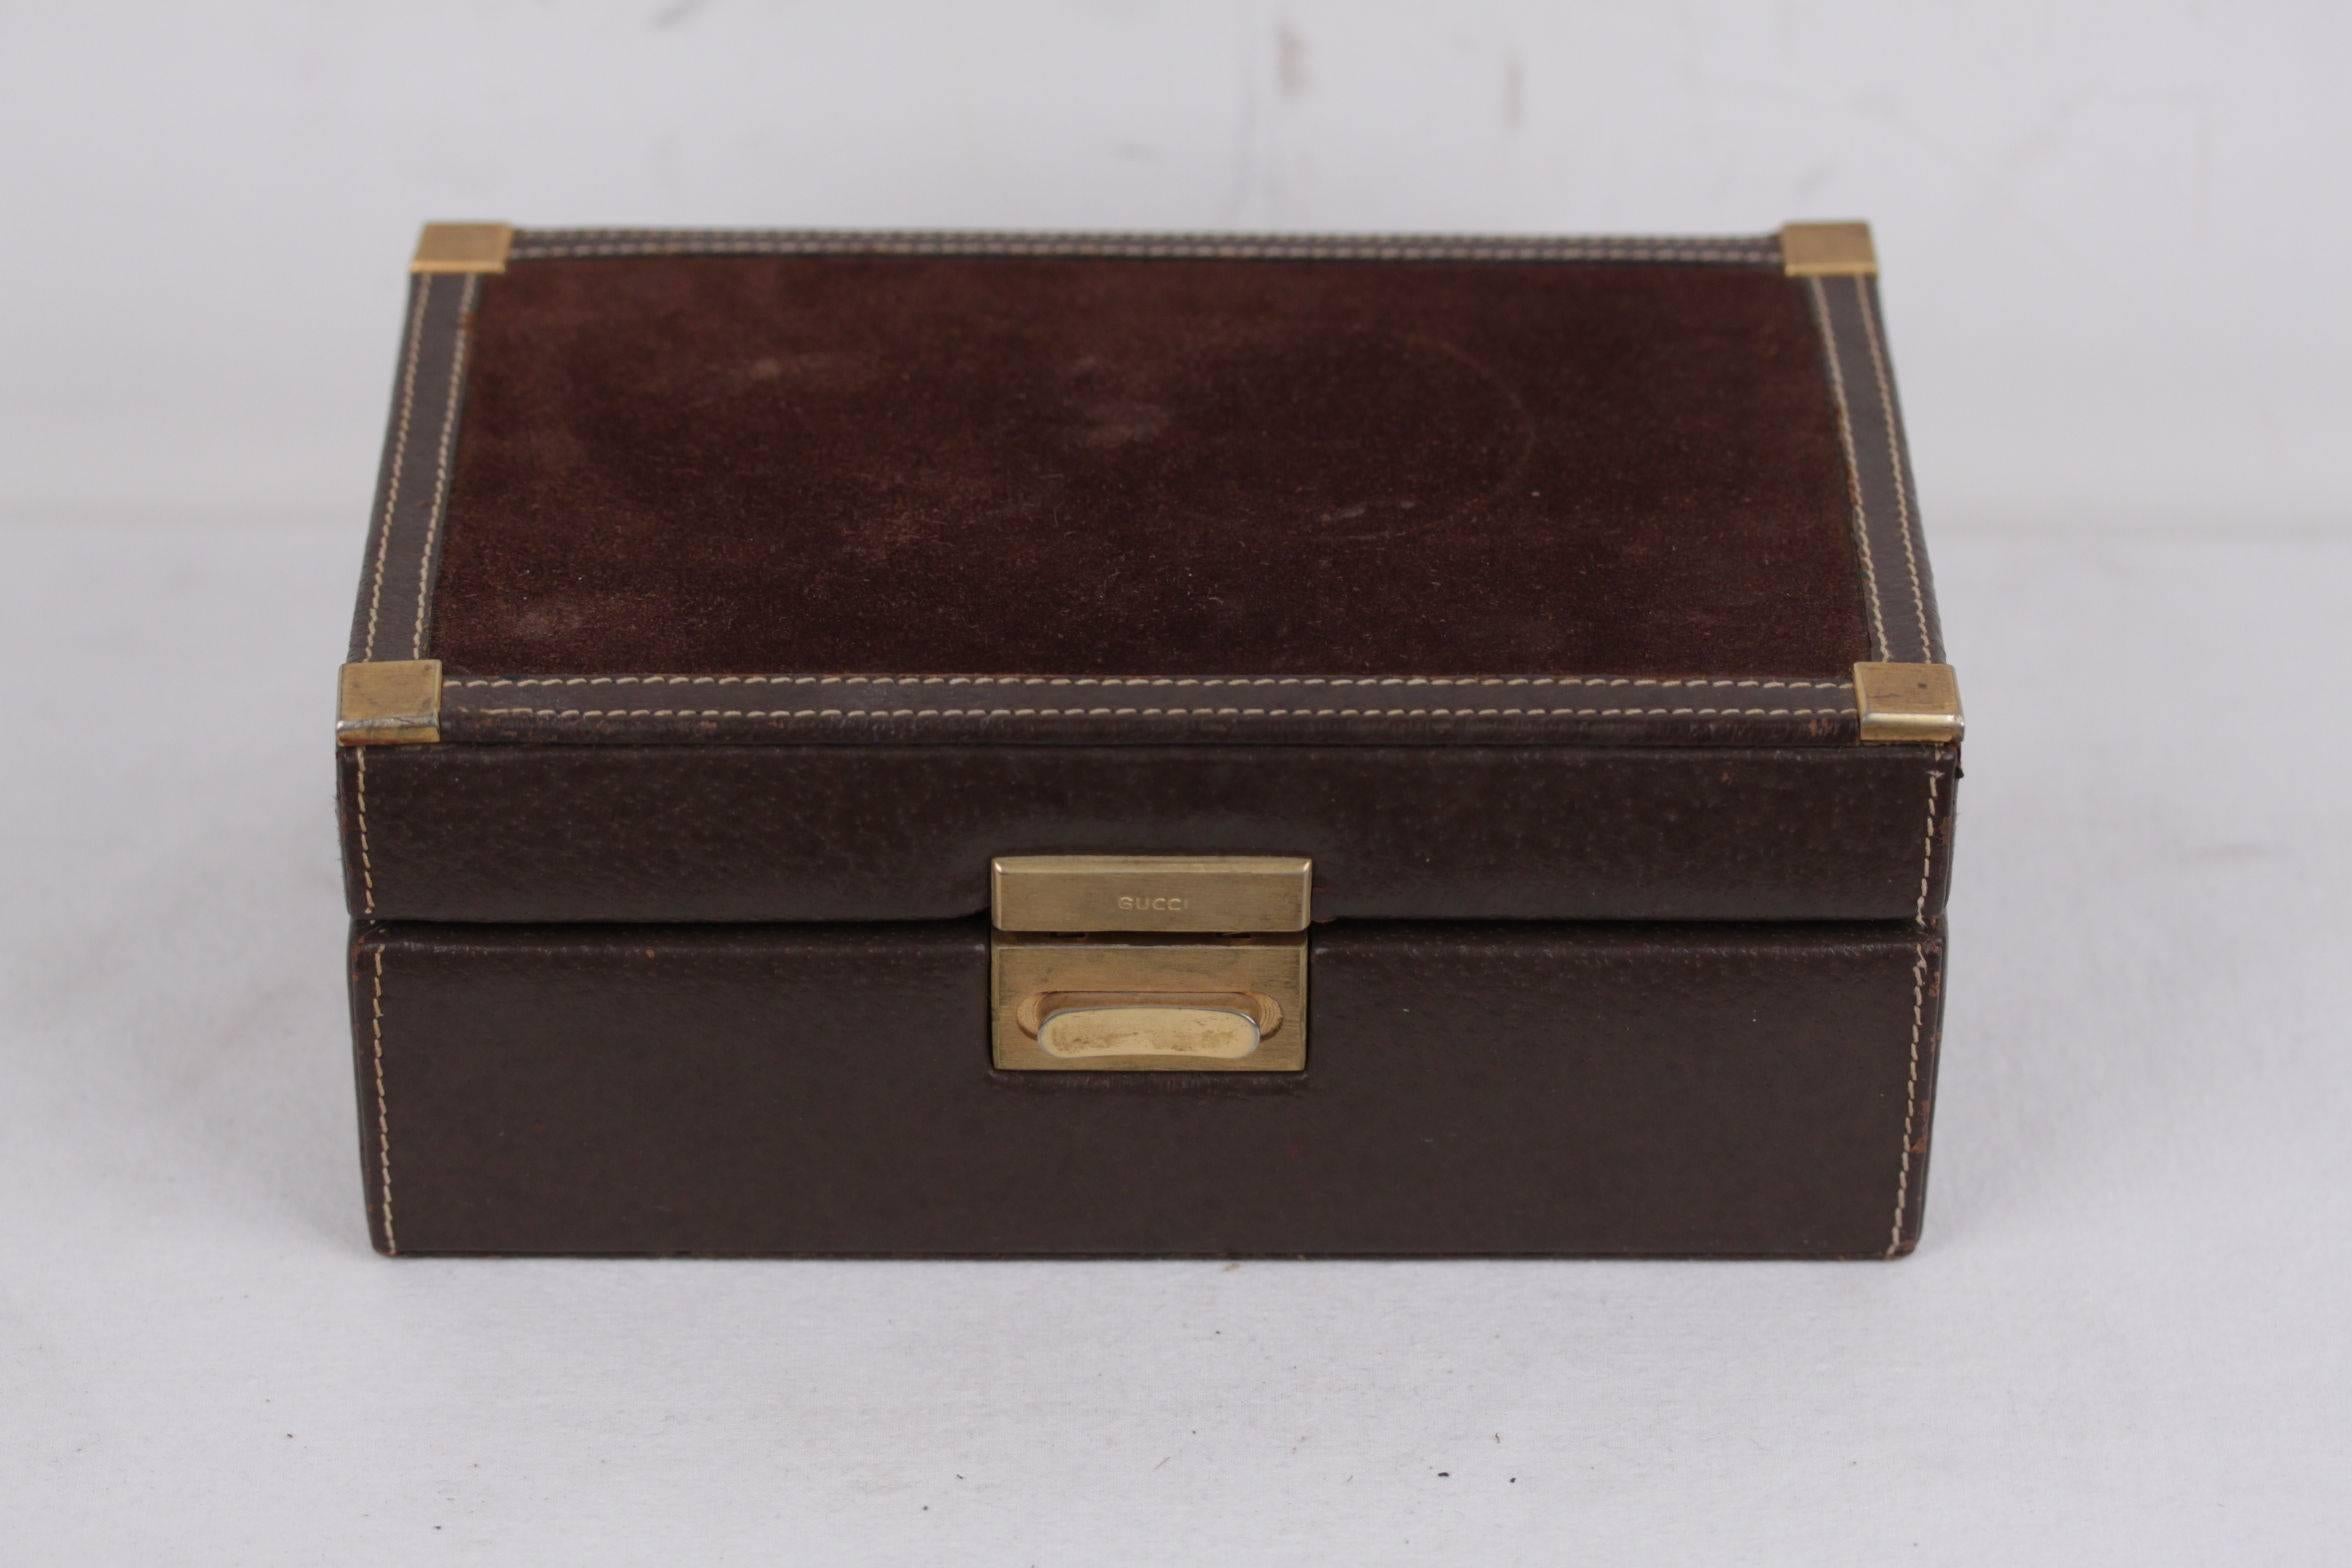 GUCCI Italian VINTAGE Brown Suede & Leather JEWELRY BOX Case 2